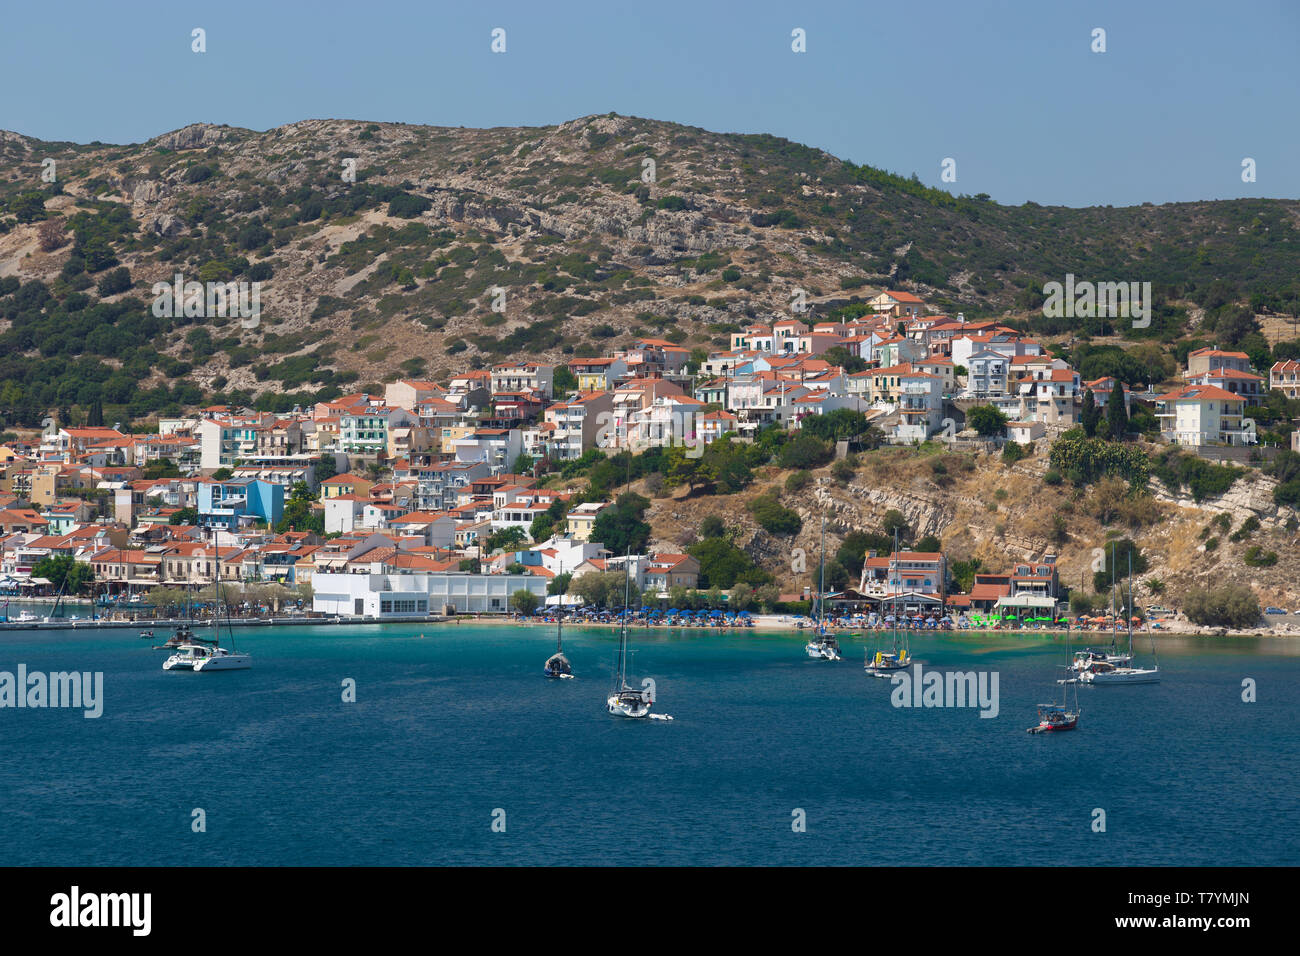 Pythagoreio is a small town and former municipality on the island of Samos, North Aegean, Greece. Stock Photo